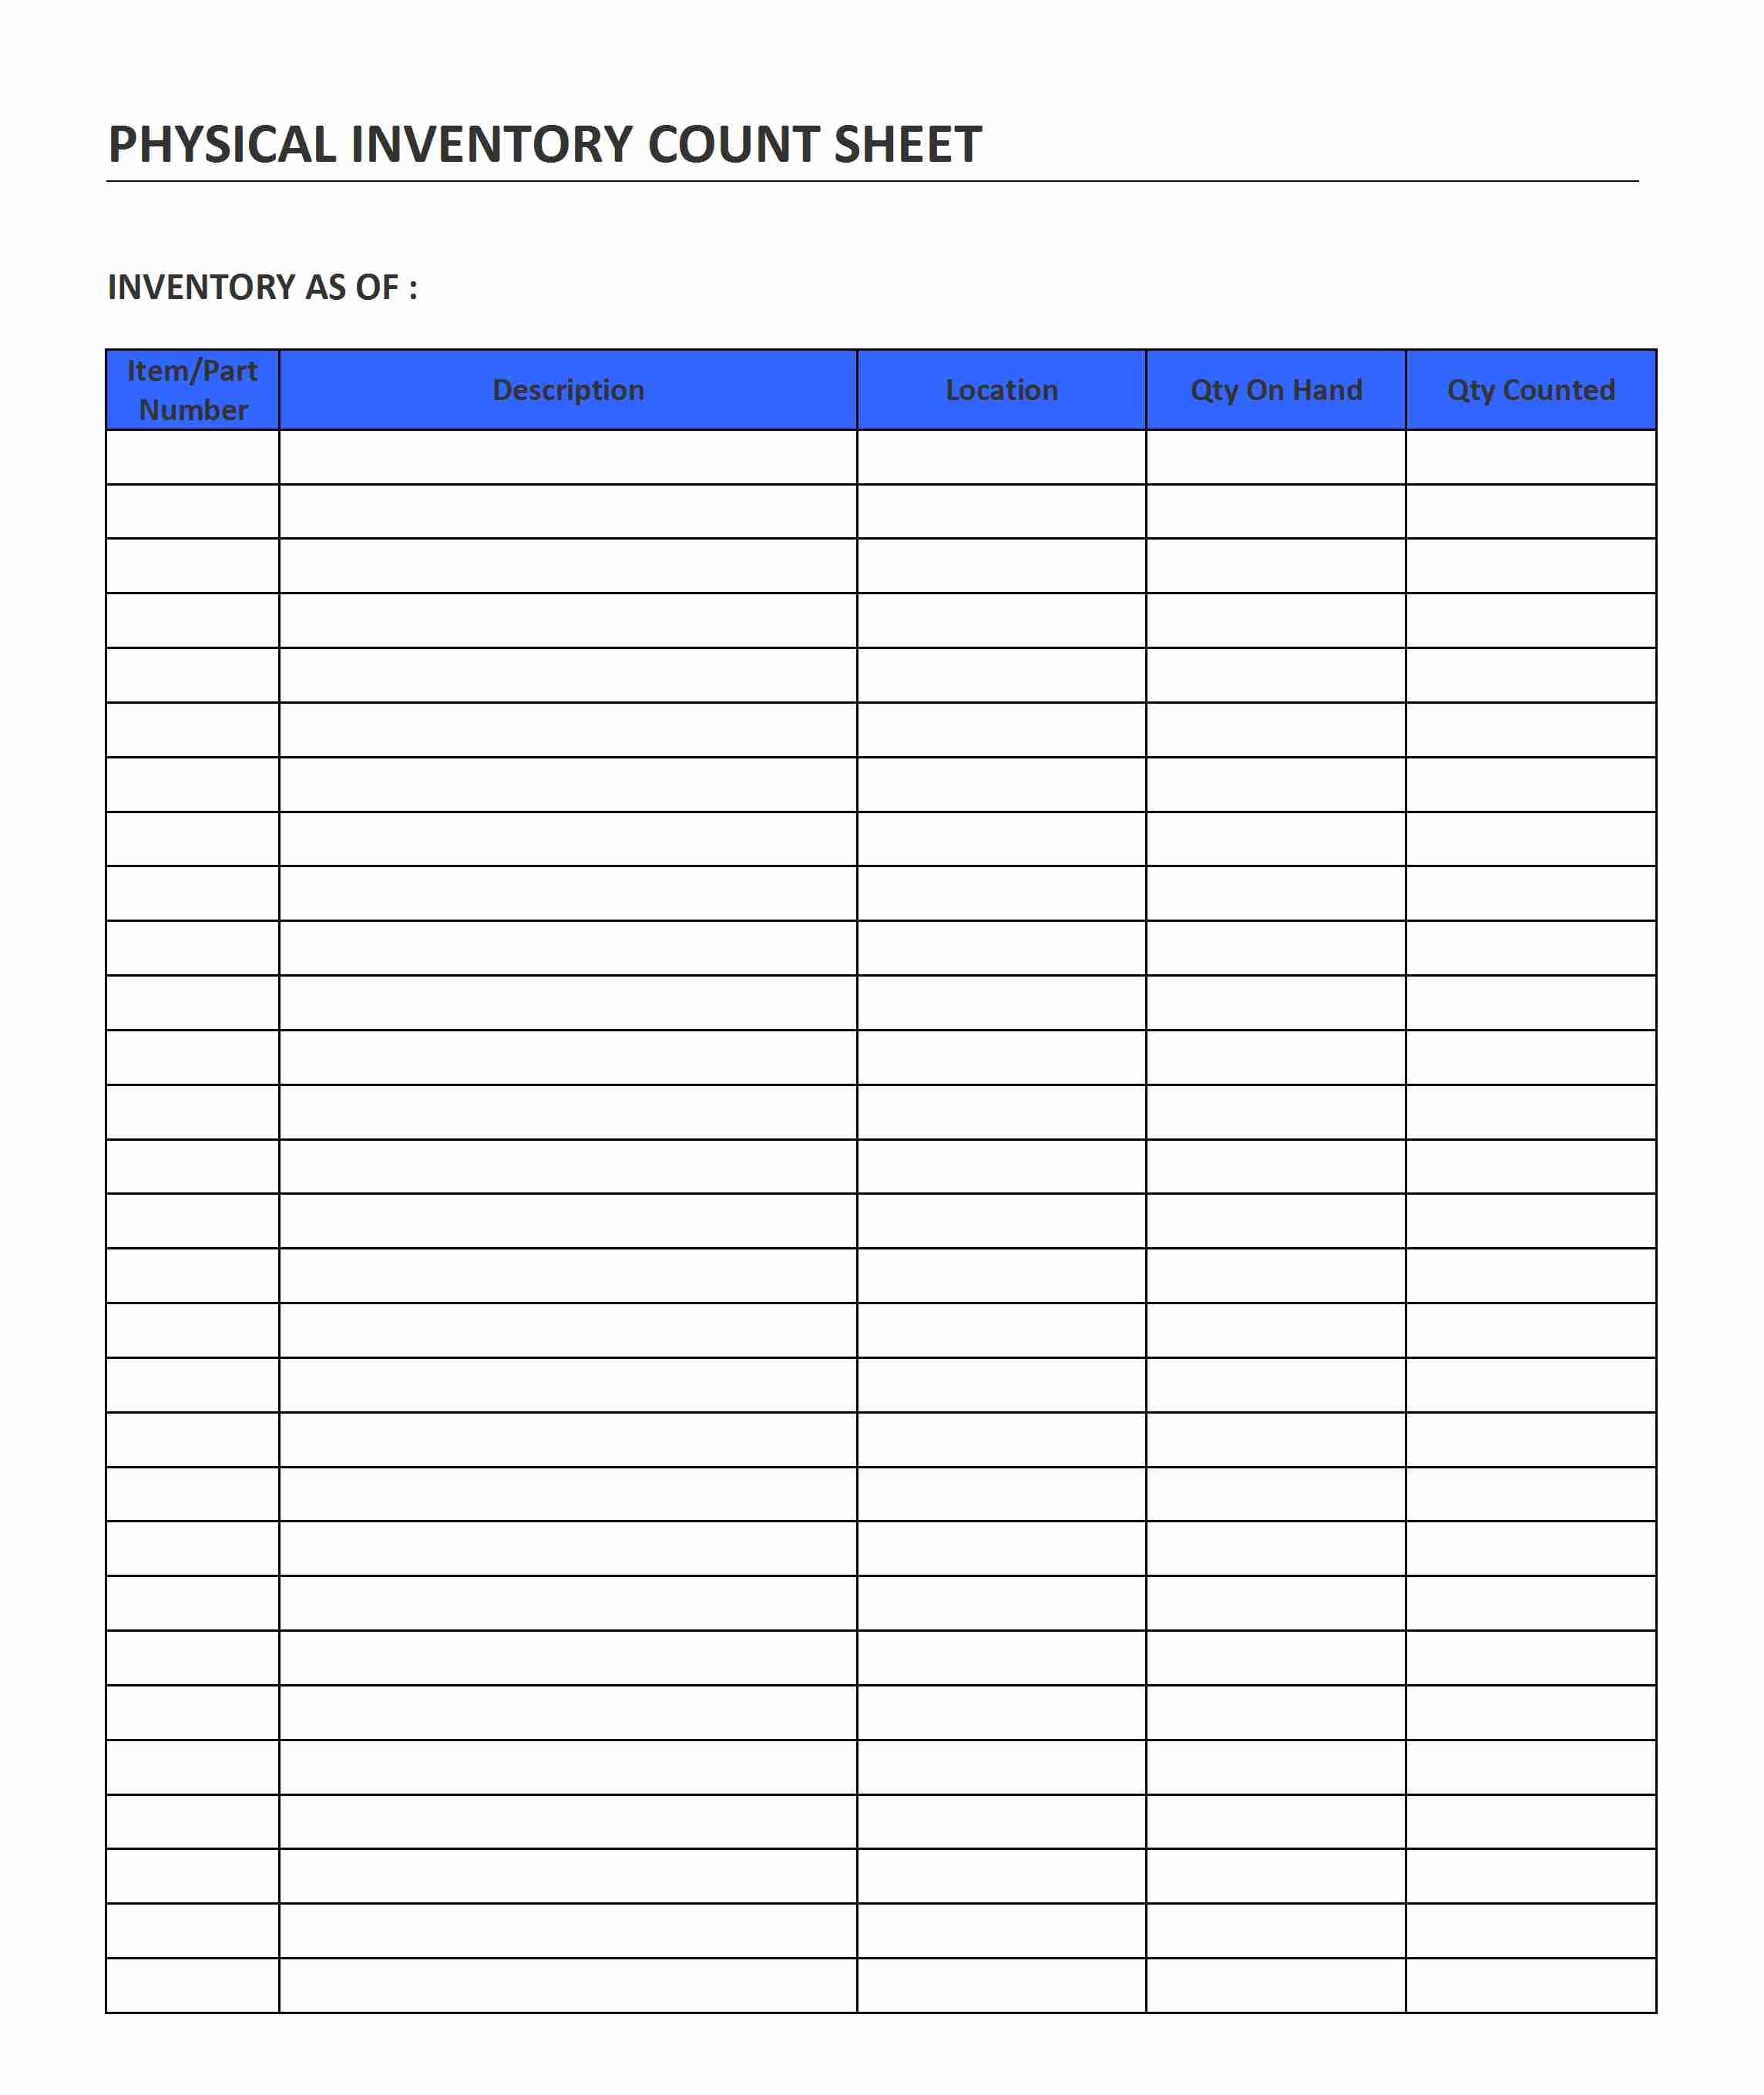 Inventory Counting Sheet Example Templates at allbusinesstemplates.com